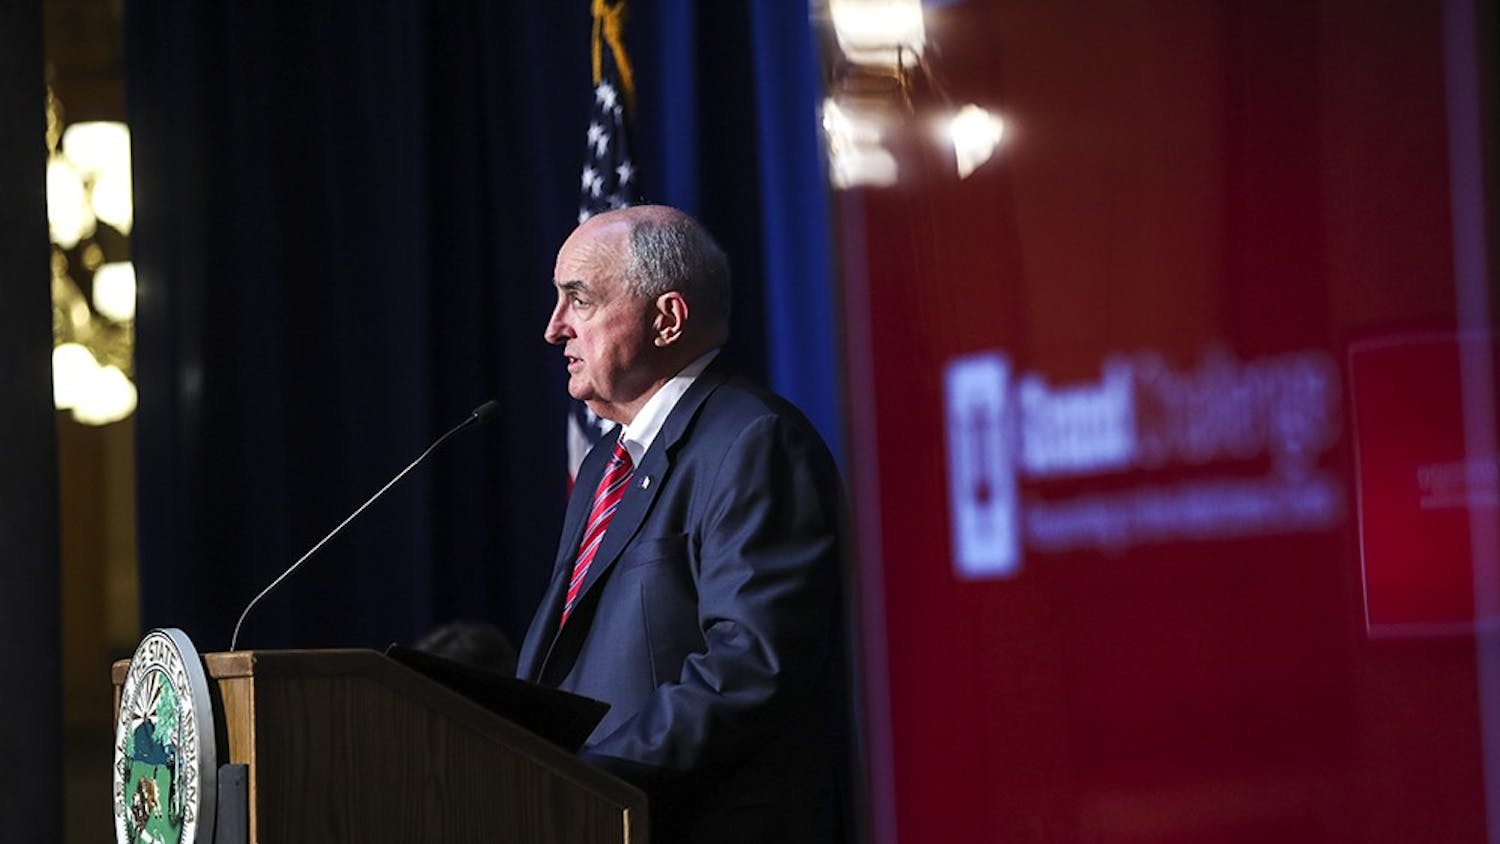 President McRobbie speaks at the press conference on the opioid crisis initiative at the Indiana State House in Indianapolis on Tuesday. The Indiana University "Grand Challenge" plans to target the opioid crisis while partnering with the Governor's Office and IU Health.